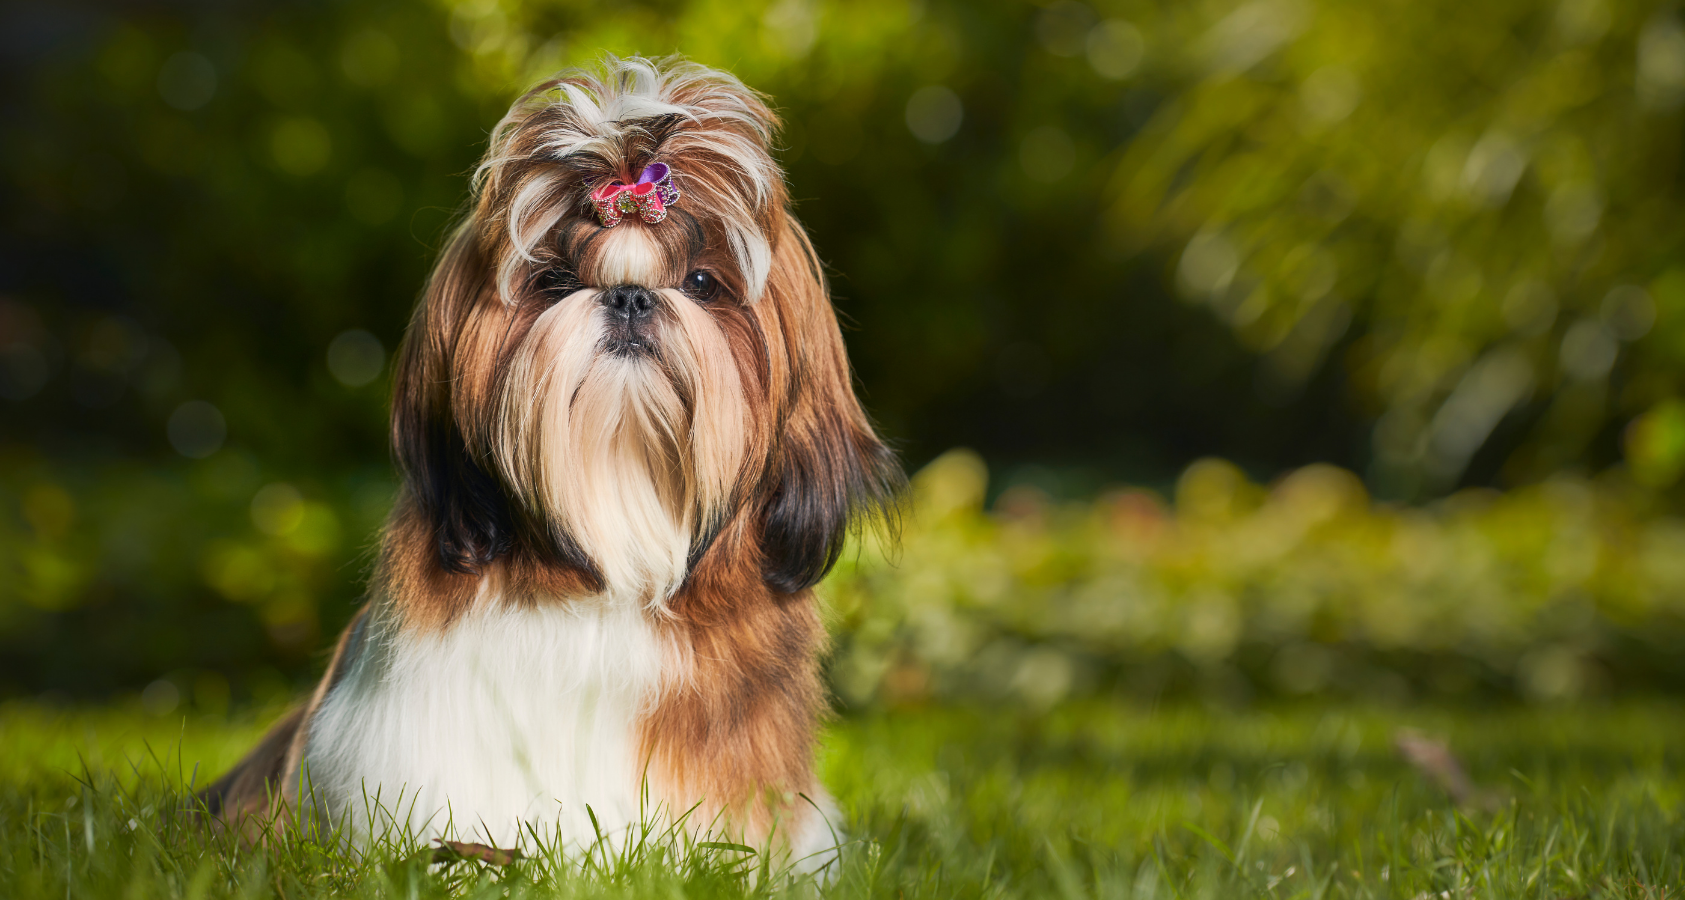 6 Dogs That Look Like Chewbacca